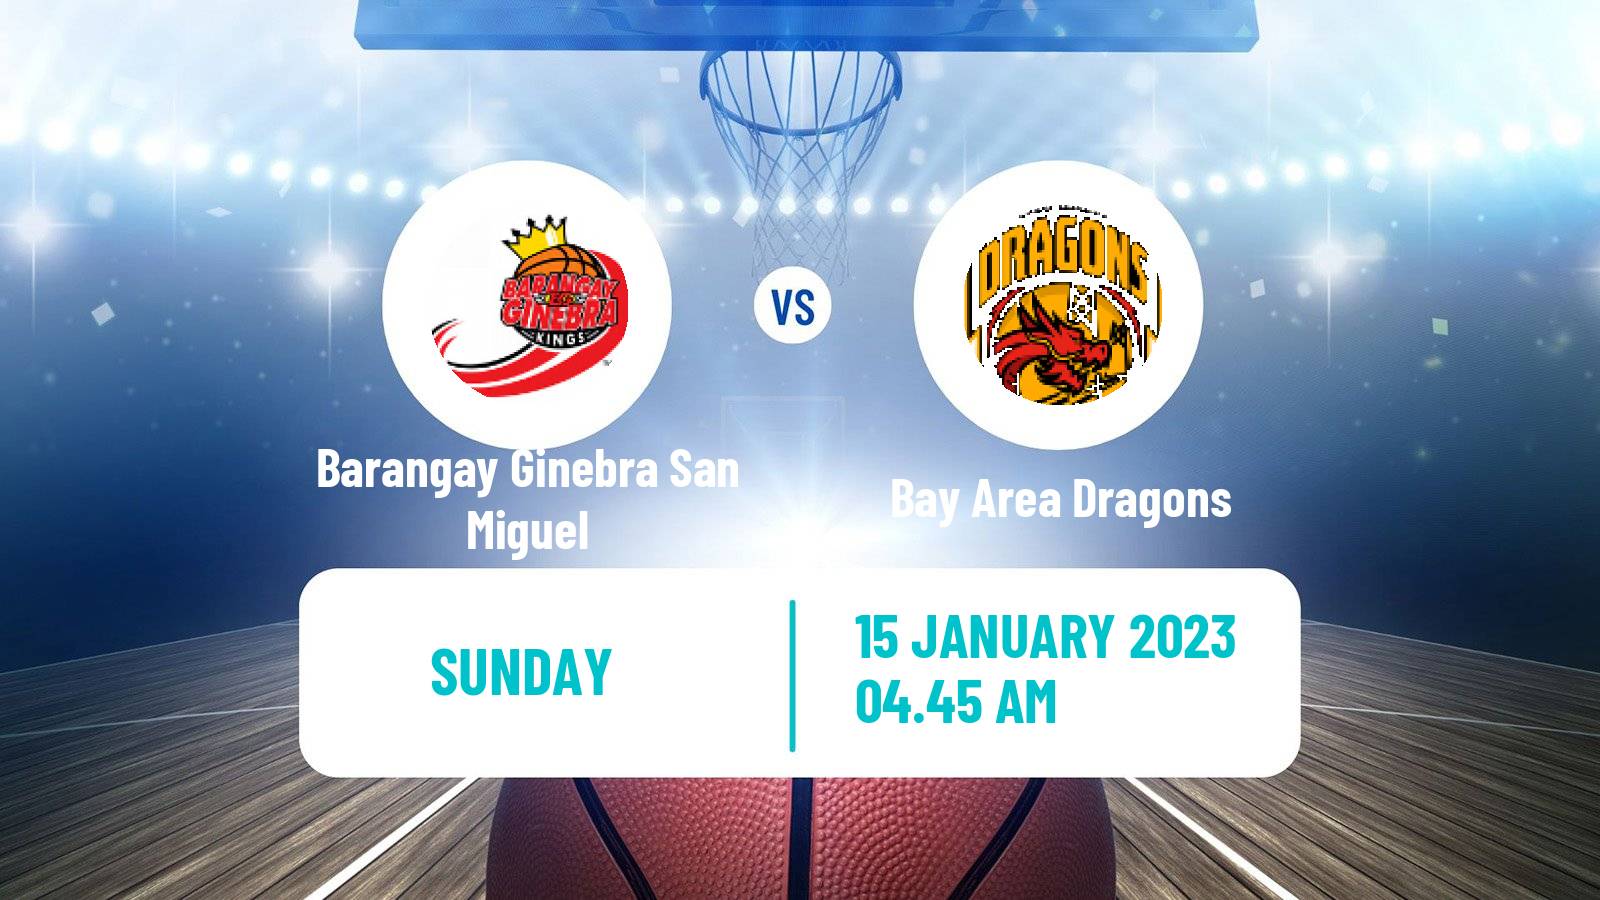 Basketball Philippines - Commissioners Cup Barangay Ginebra San Miguel - Bay Area Dragons